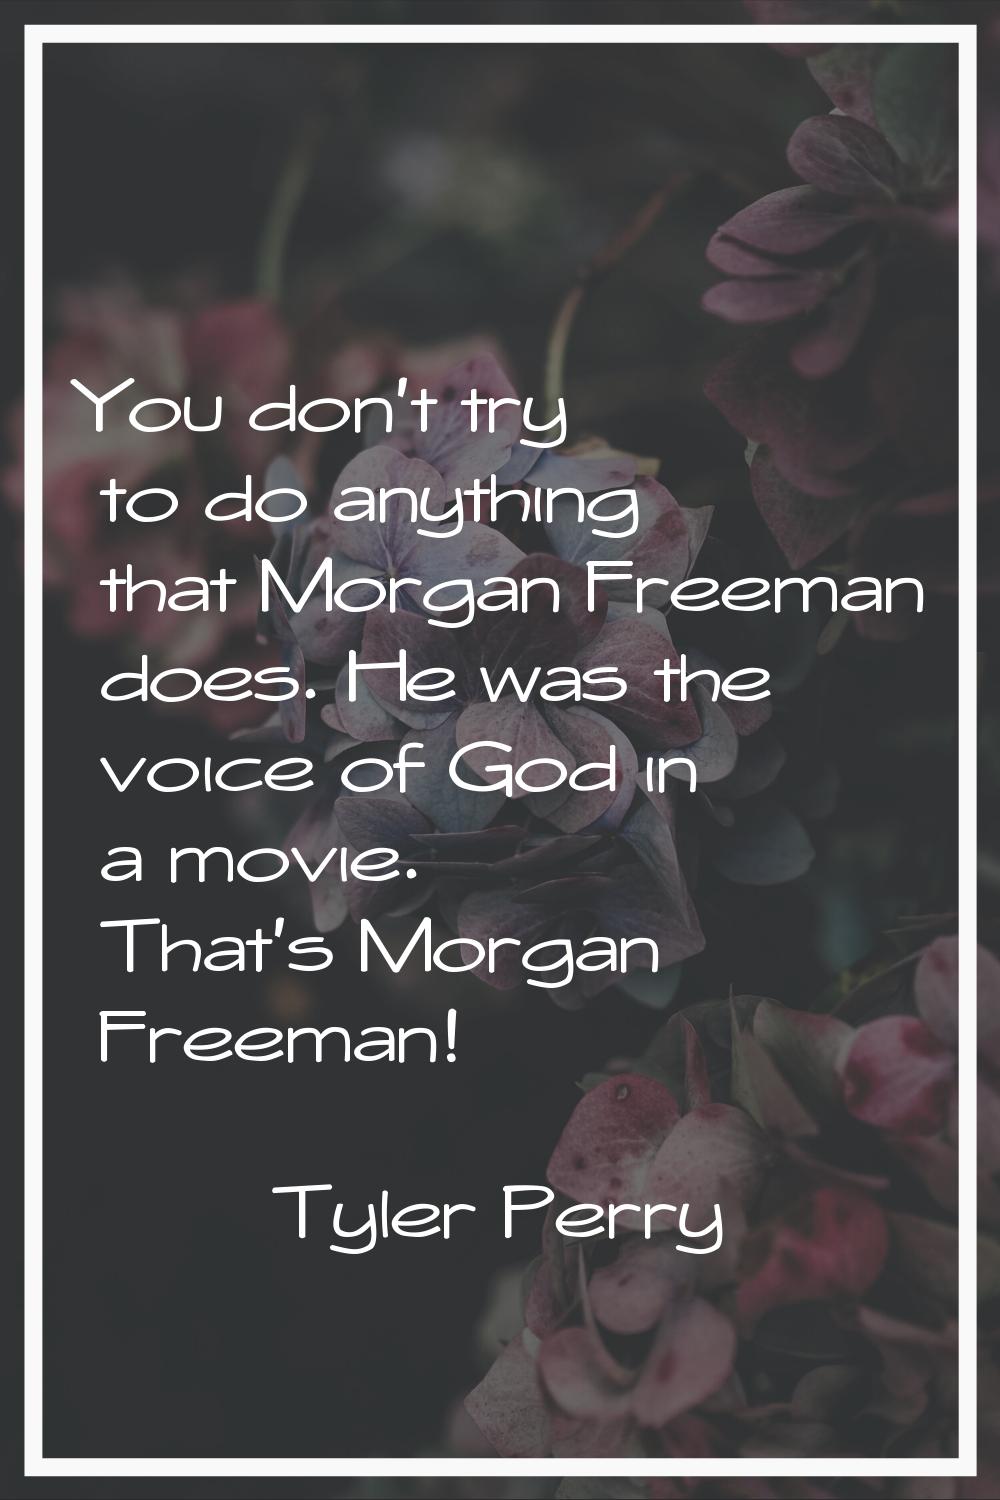 You don't try to do anything that Morgan Freeman does. He was the voice of God in a movie. That's M